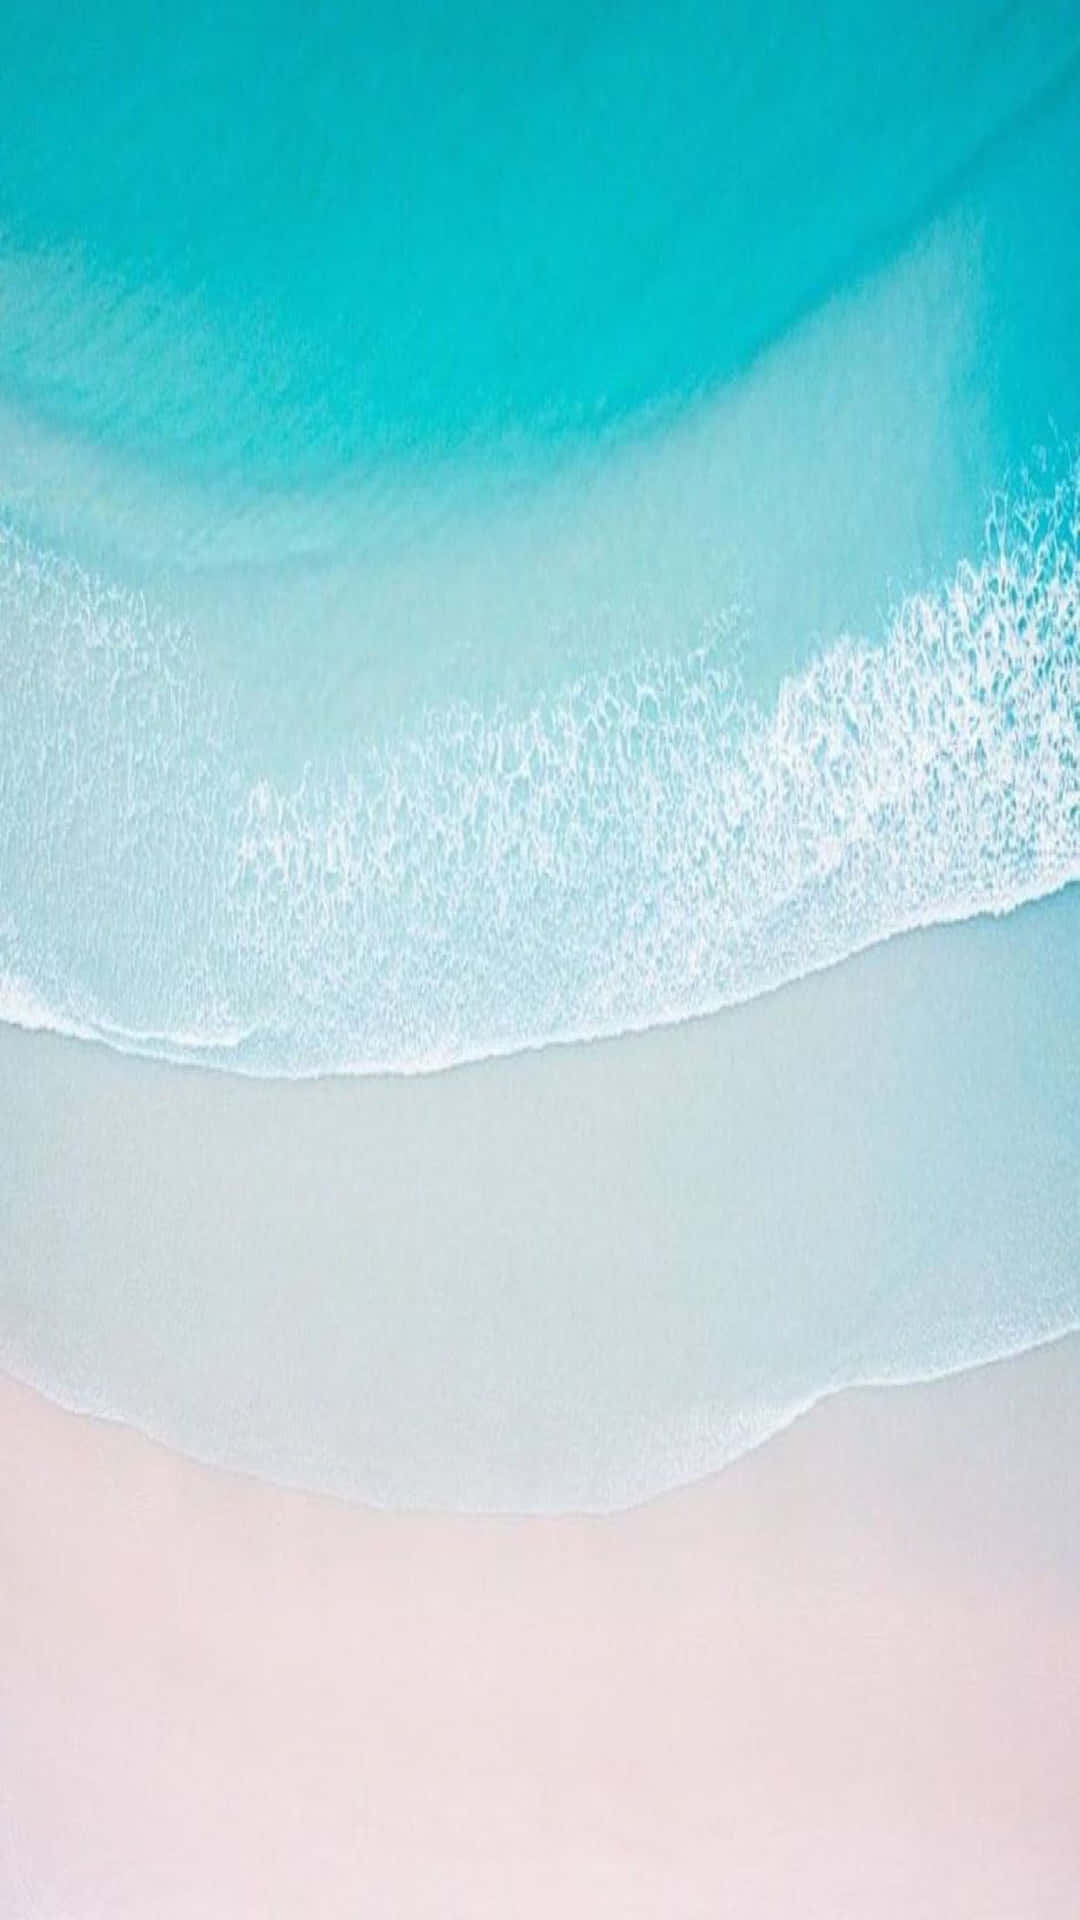 This beautiful turquoise iPhone is sure to be the envy of all your friends. Wallpaper